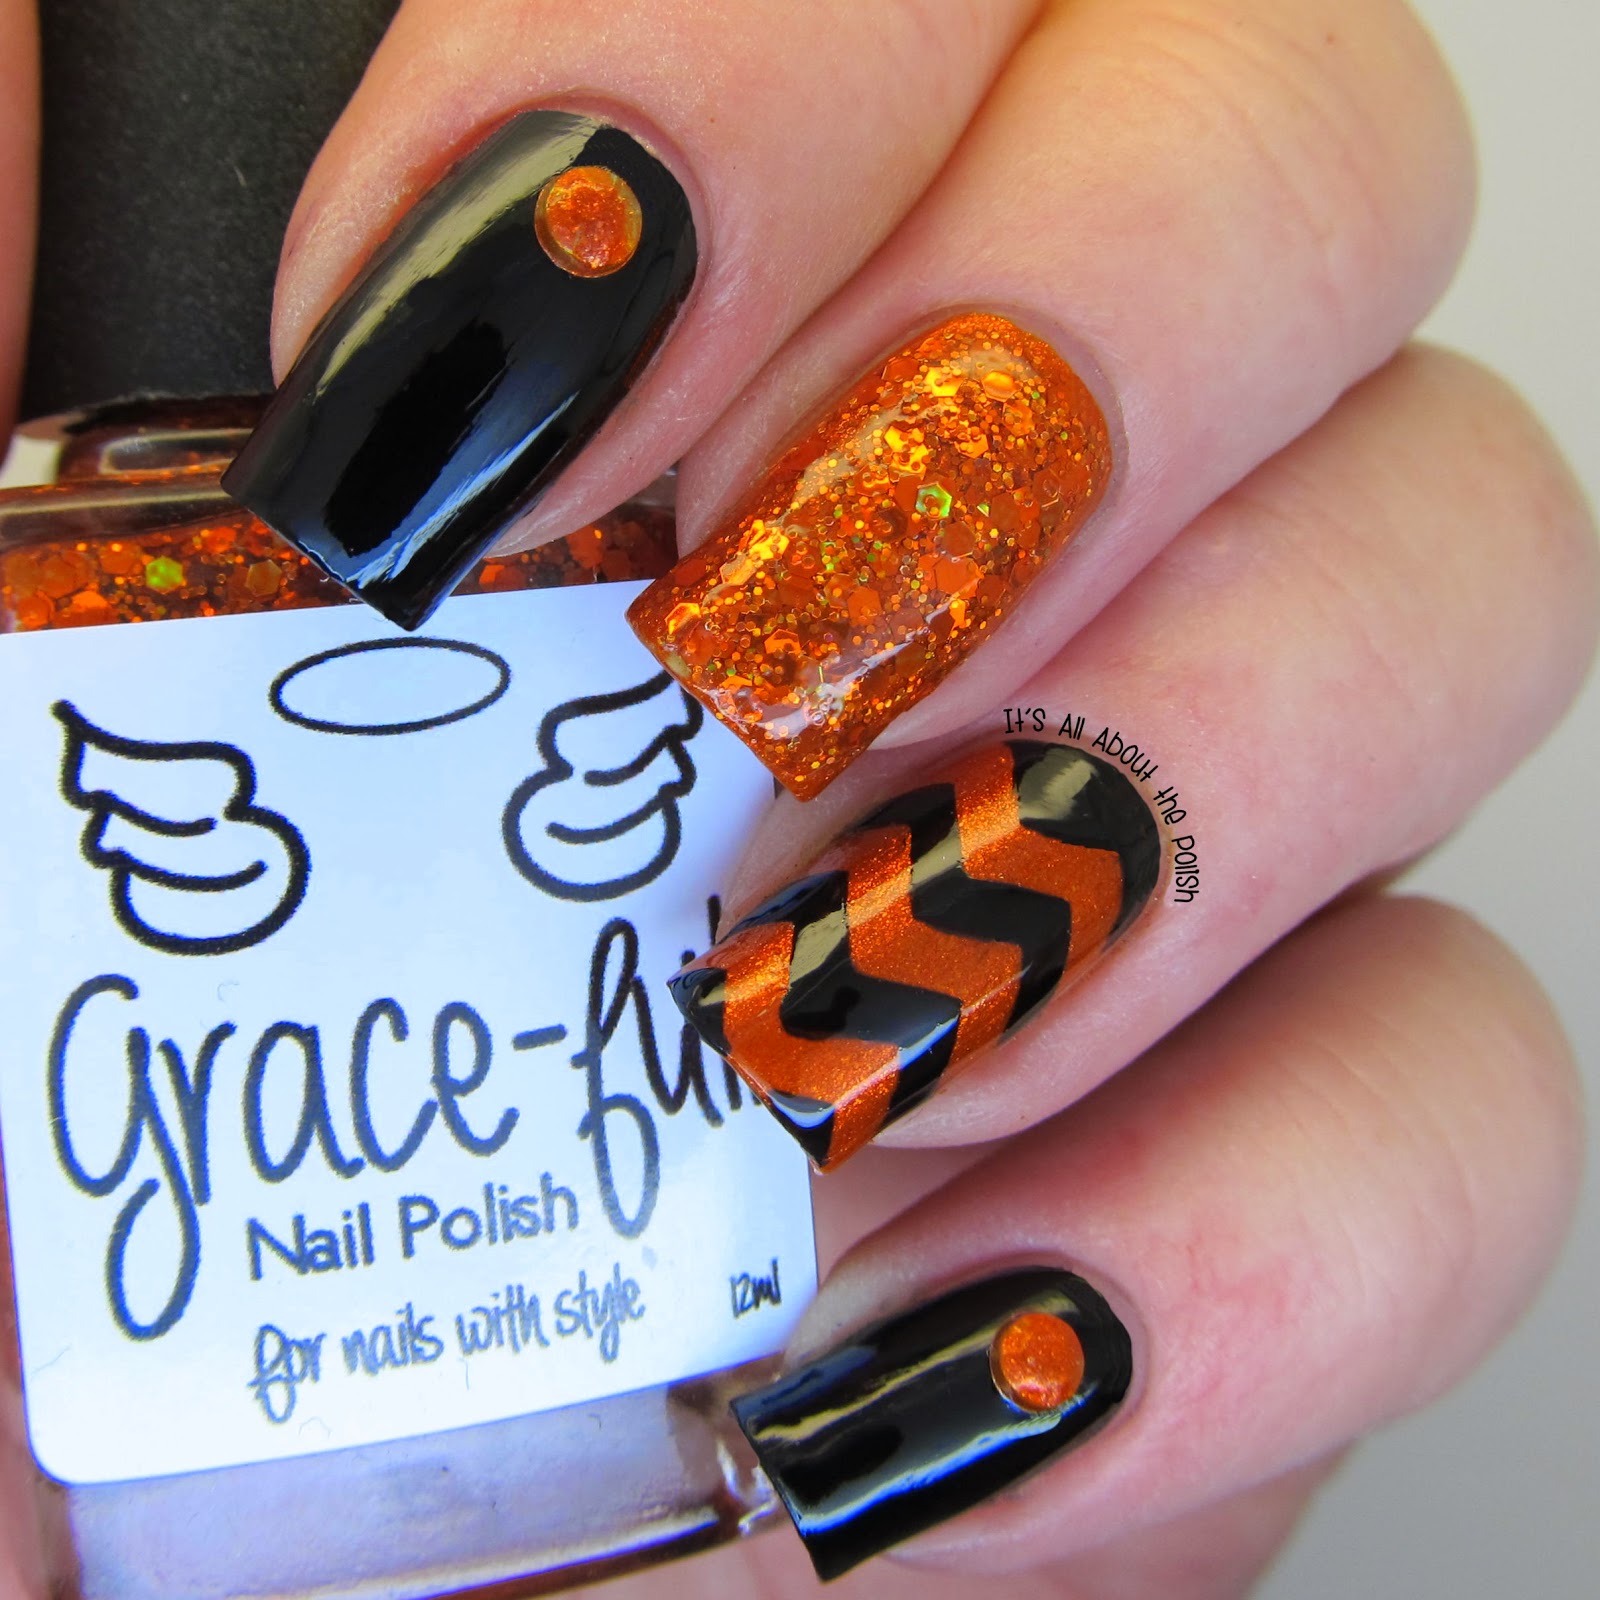 It's all about the polish: Halloween Skittlette - orange and black